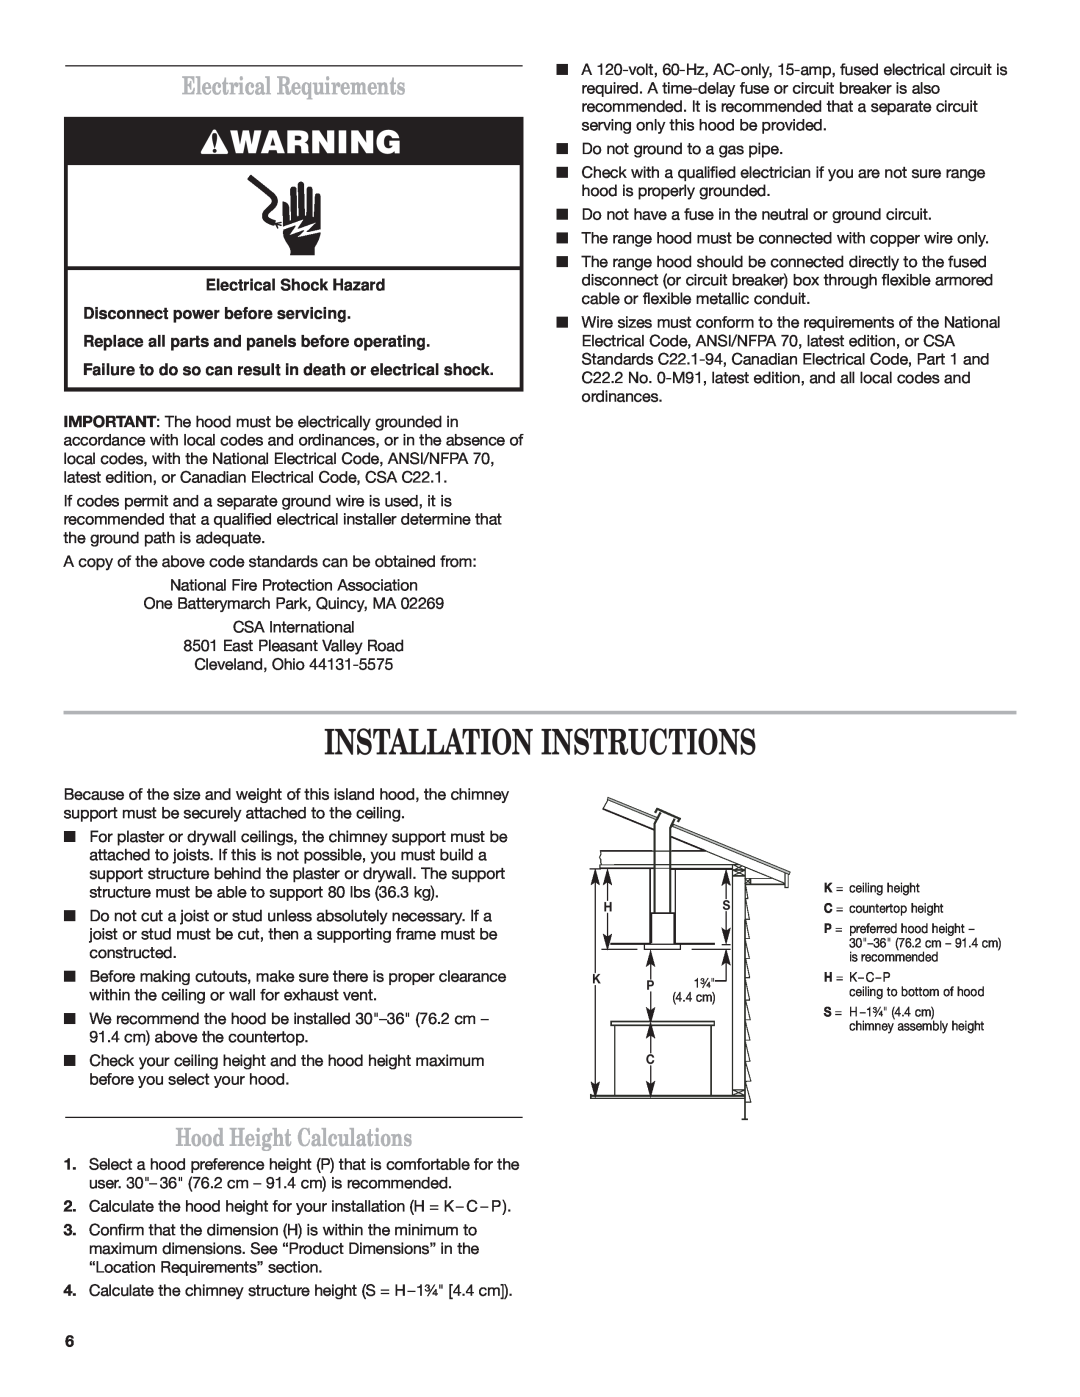 Whirlpool Ventilation Hood Installation Instructions, Electrical Requirements, Hood Height Calculations 